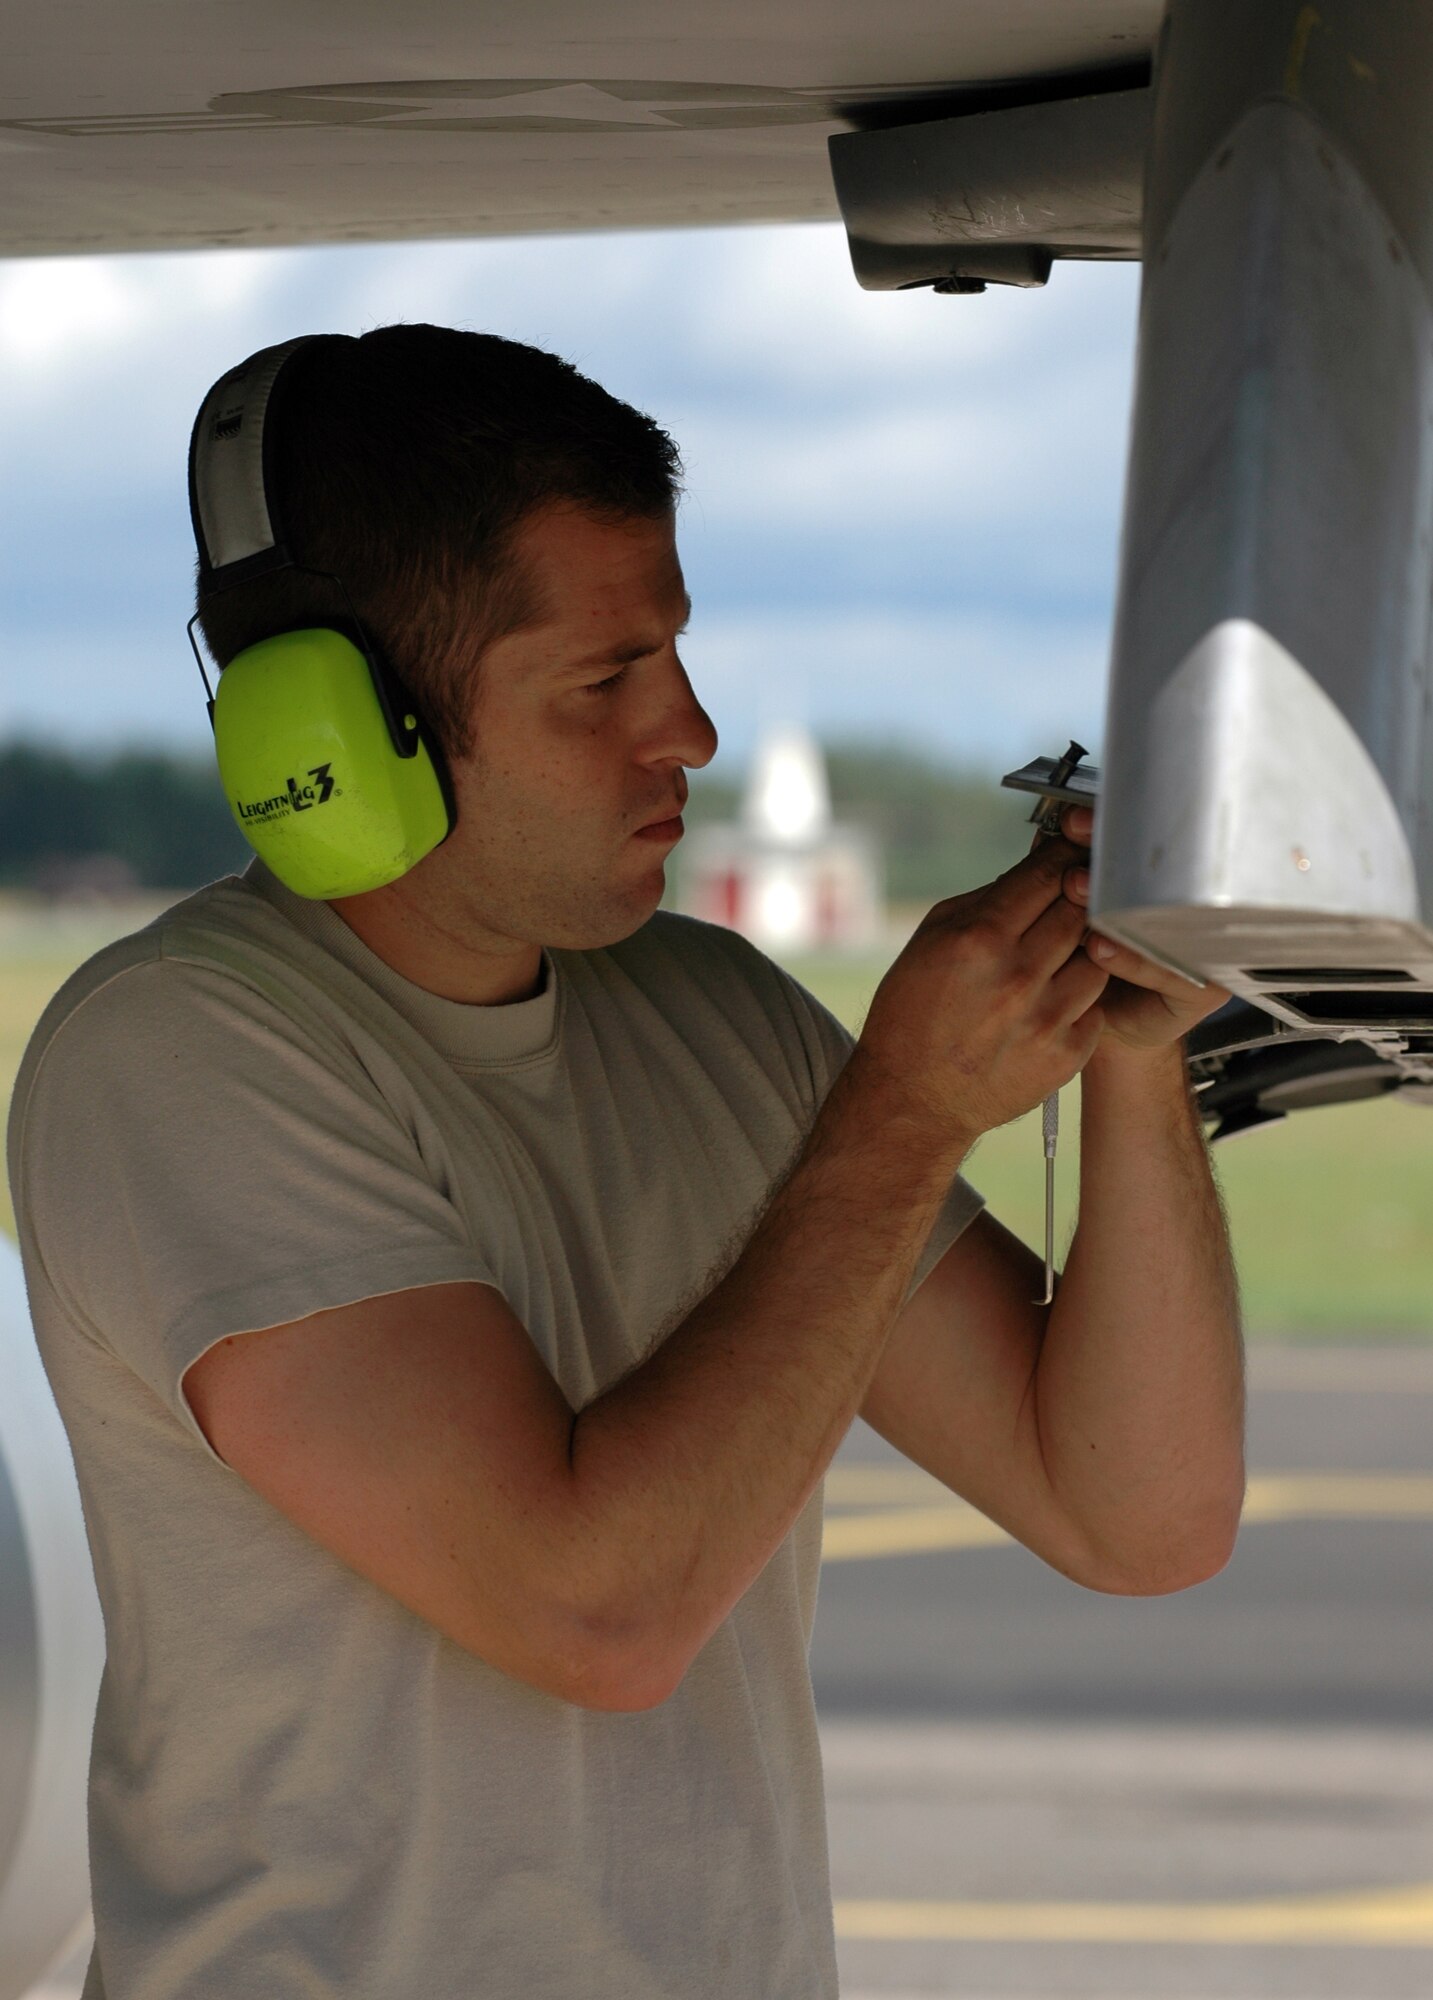 Staff Sgt. John Tuscher, 31st Aircraft Maintenance Squadron weapons load crew member, prepares for a practice munitions load onto an F-16 Aug. 6, 2010 at Kallax Air Base, Sweden. The 555th Fighter Squadron and 31st AMXS conducted more than 180 air-to-air and air-to-ground missions during a two week exercise at the air base in which they worked alongside the Swedish air force's Norrbotten Wing. (U.S. Air Force photo by Tech. Sgt. Lindsey Maurice/Released)